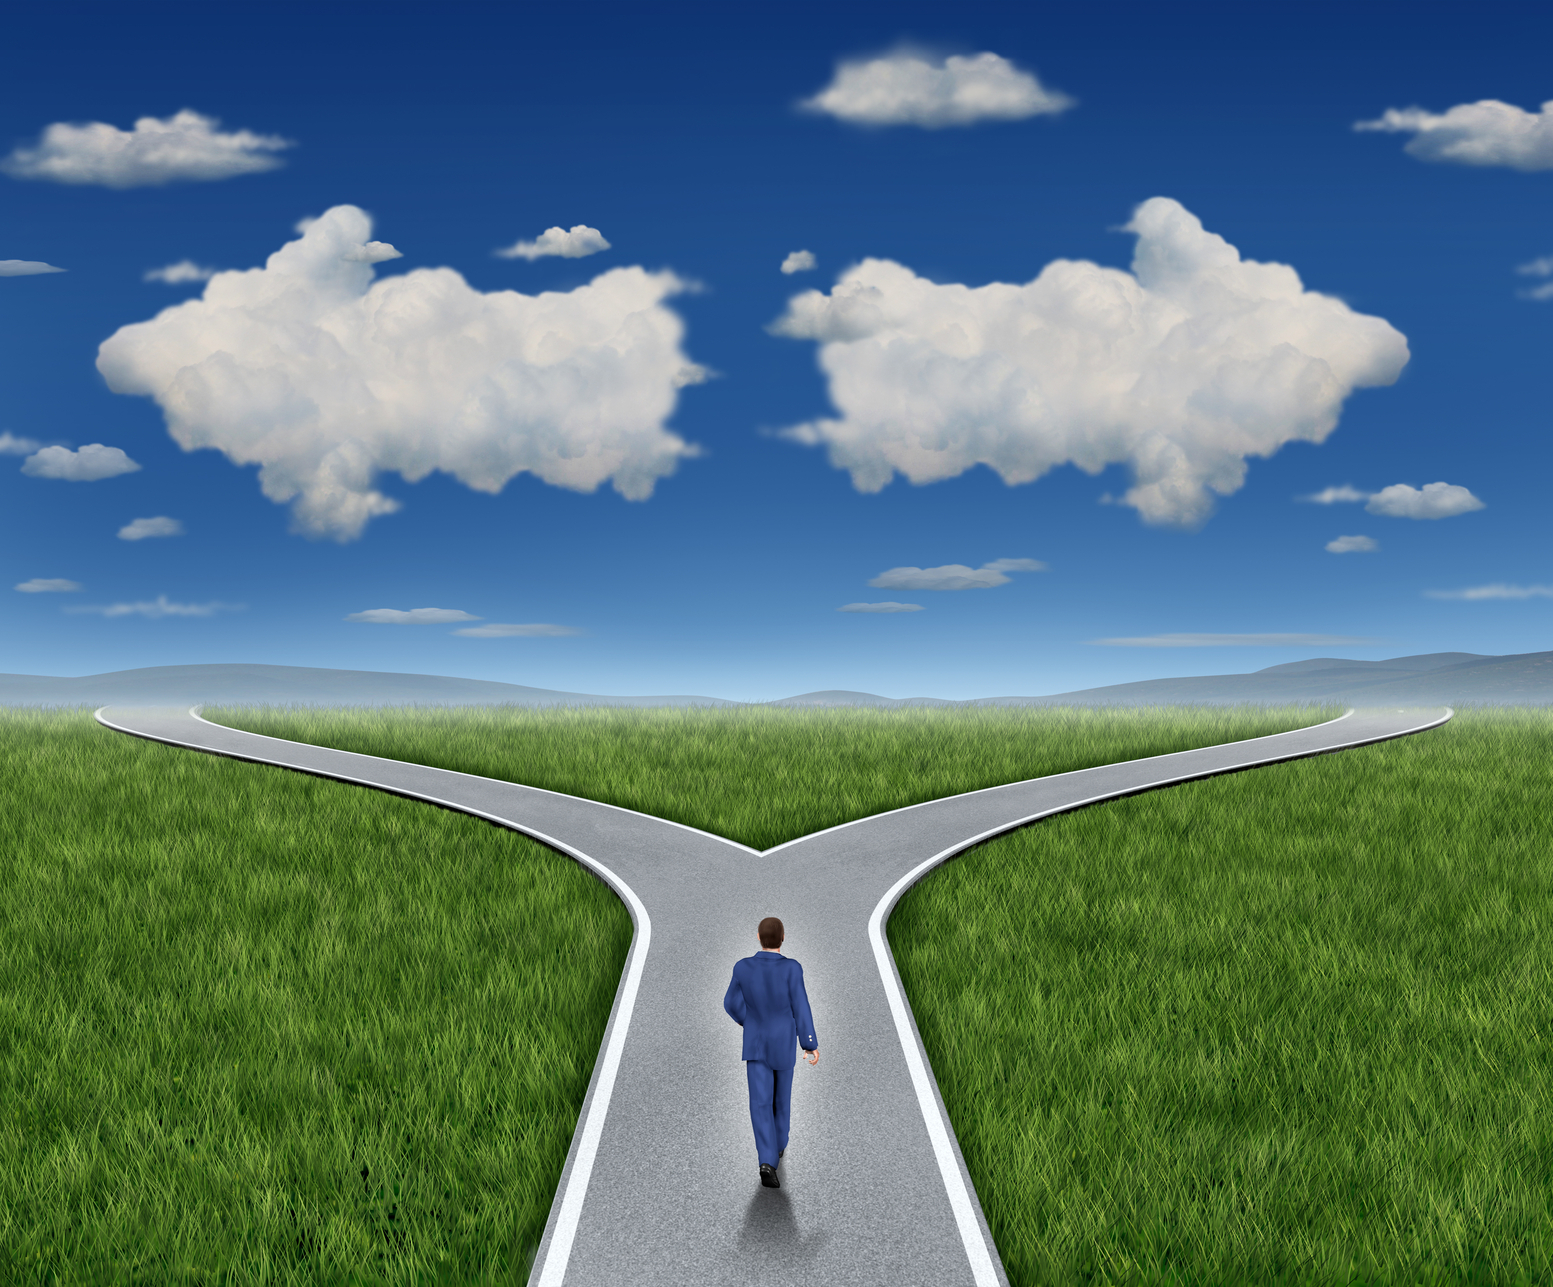 Experiencing difficulty in deciding which life path to choose?